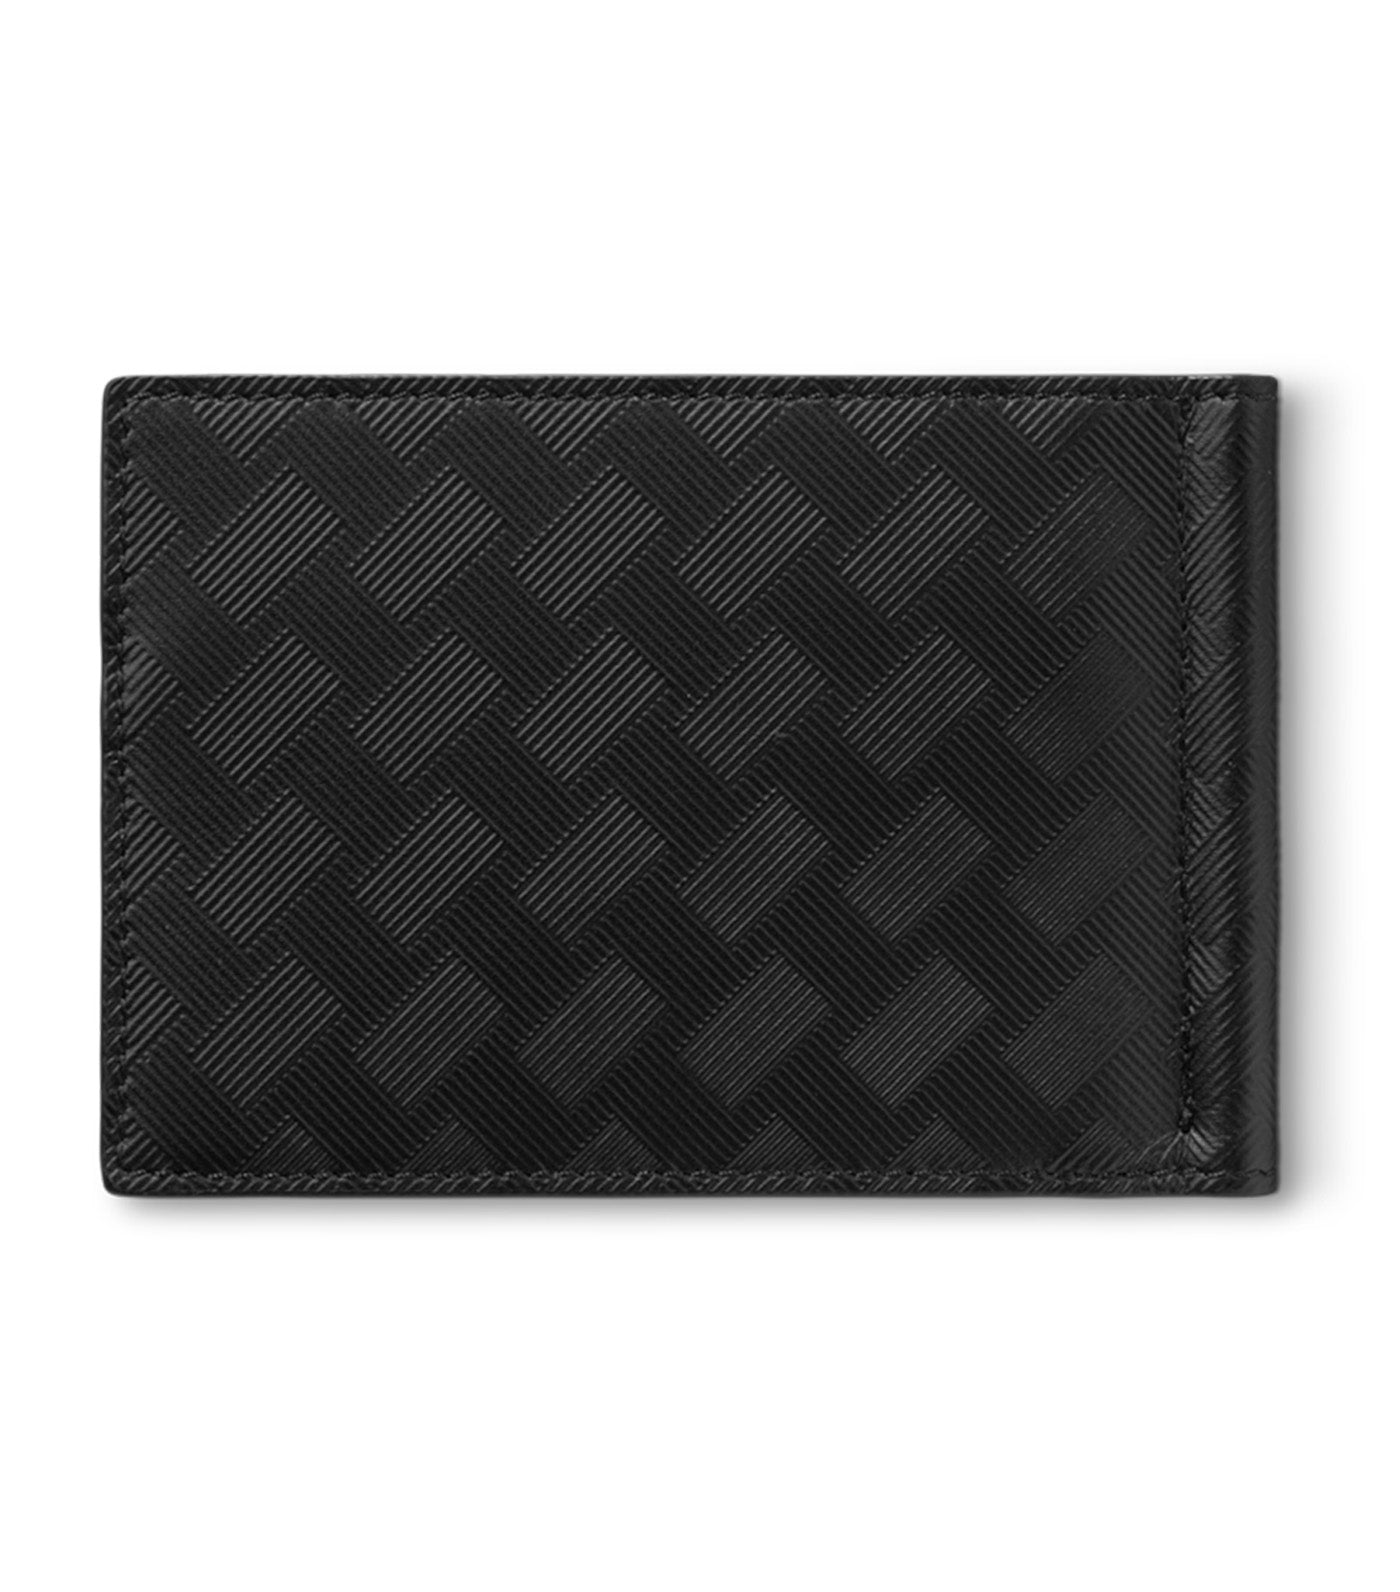 Extreme 3.0 Wallet 6cc With Money Clip Black